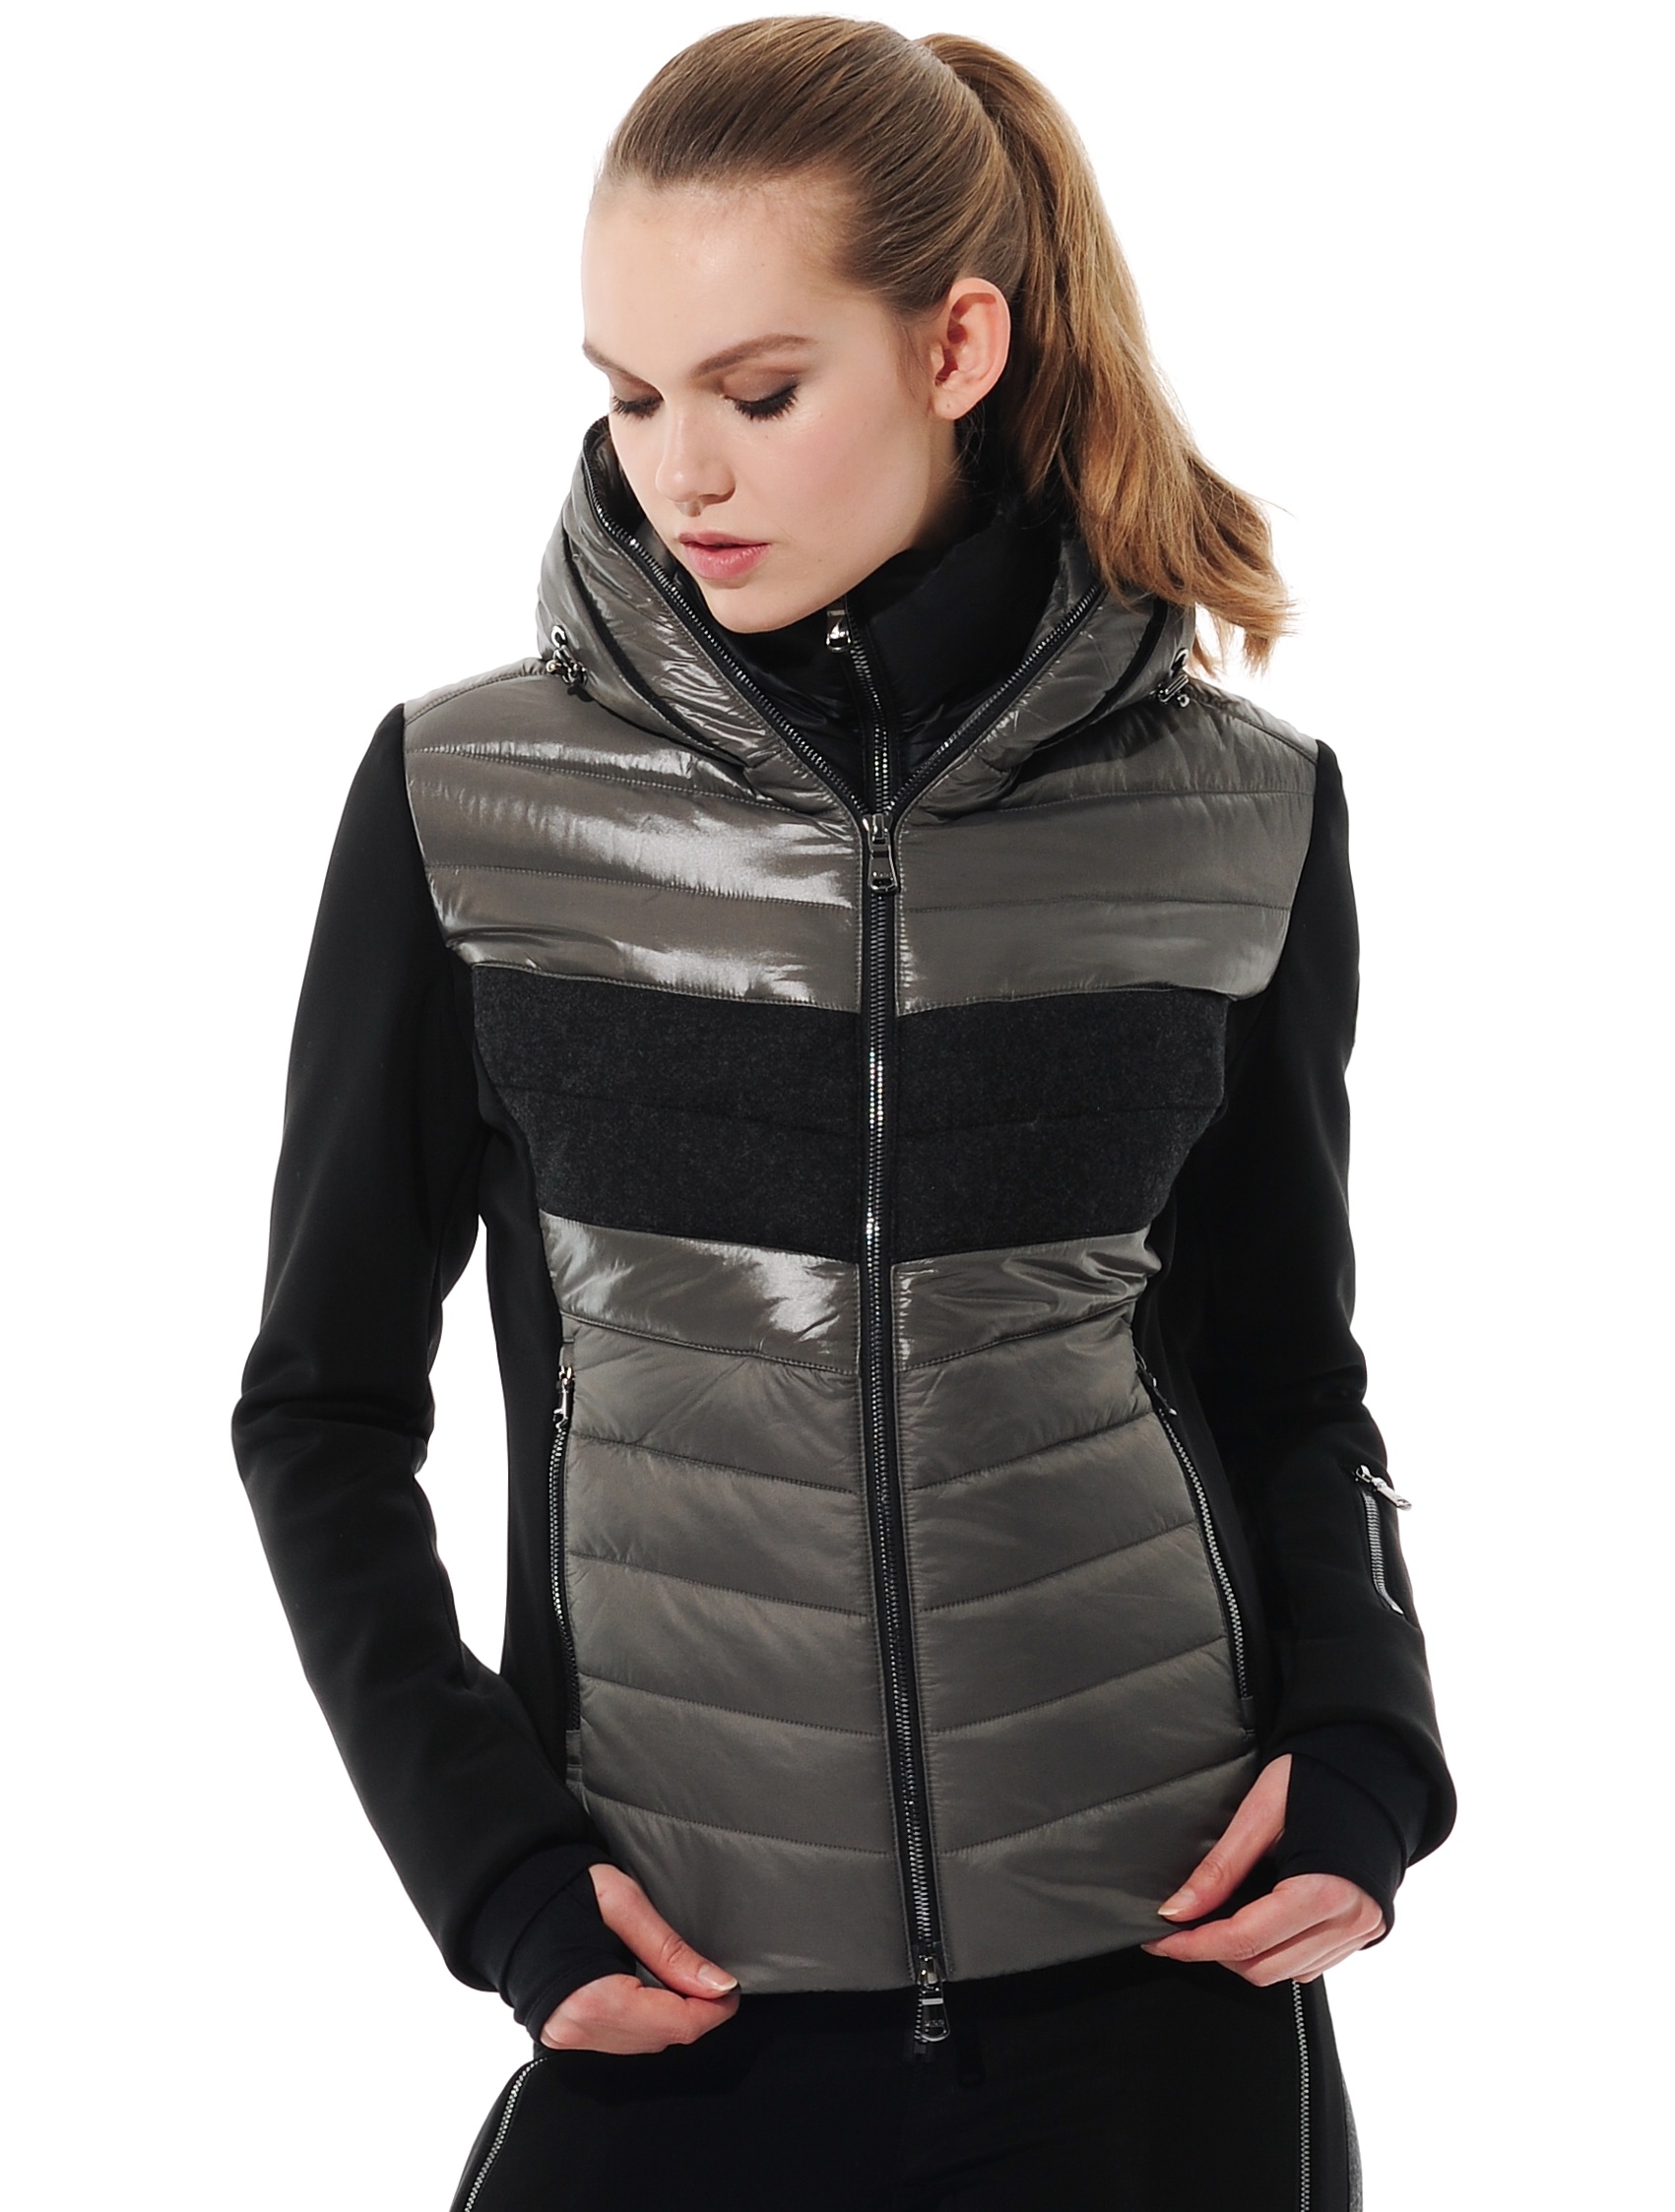 ski jacket with 4way stretch sleeves and side panels steel/black 